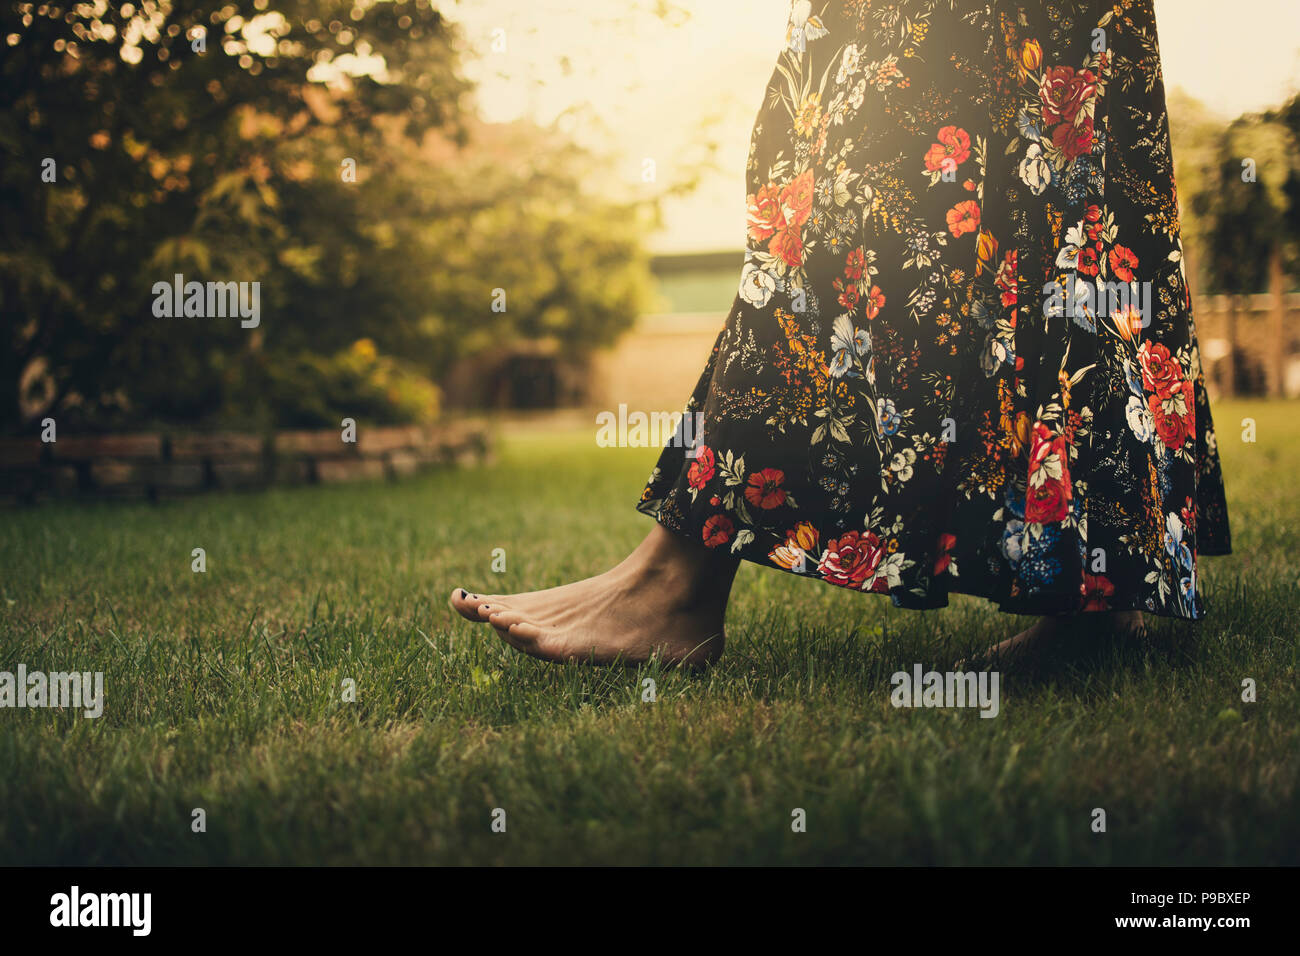 woman walking barefoot on the grass in sunlight Stock Photo